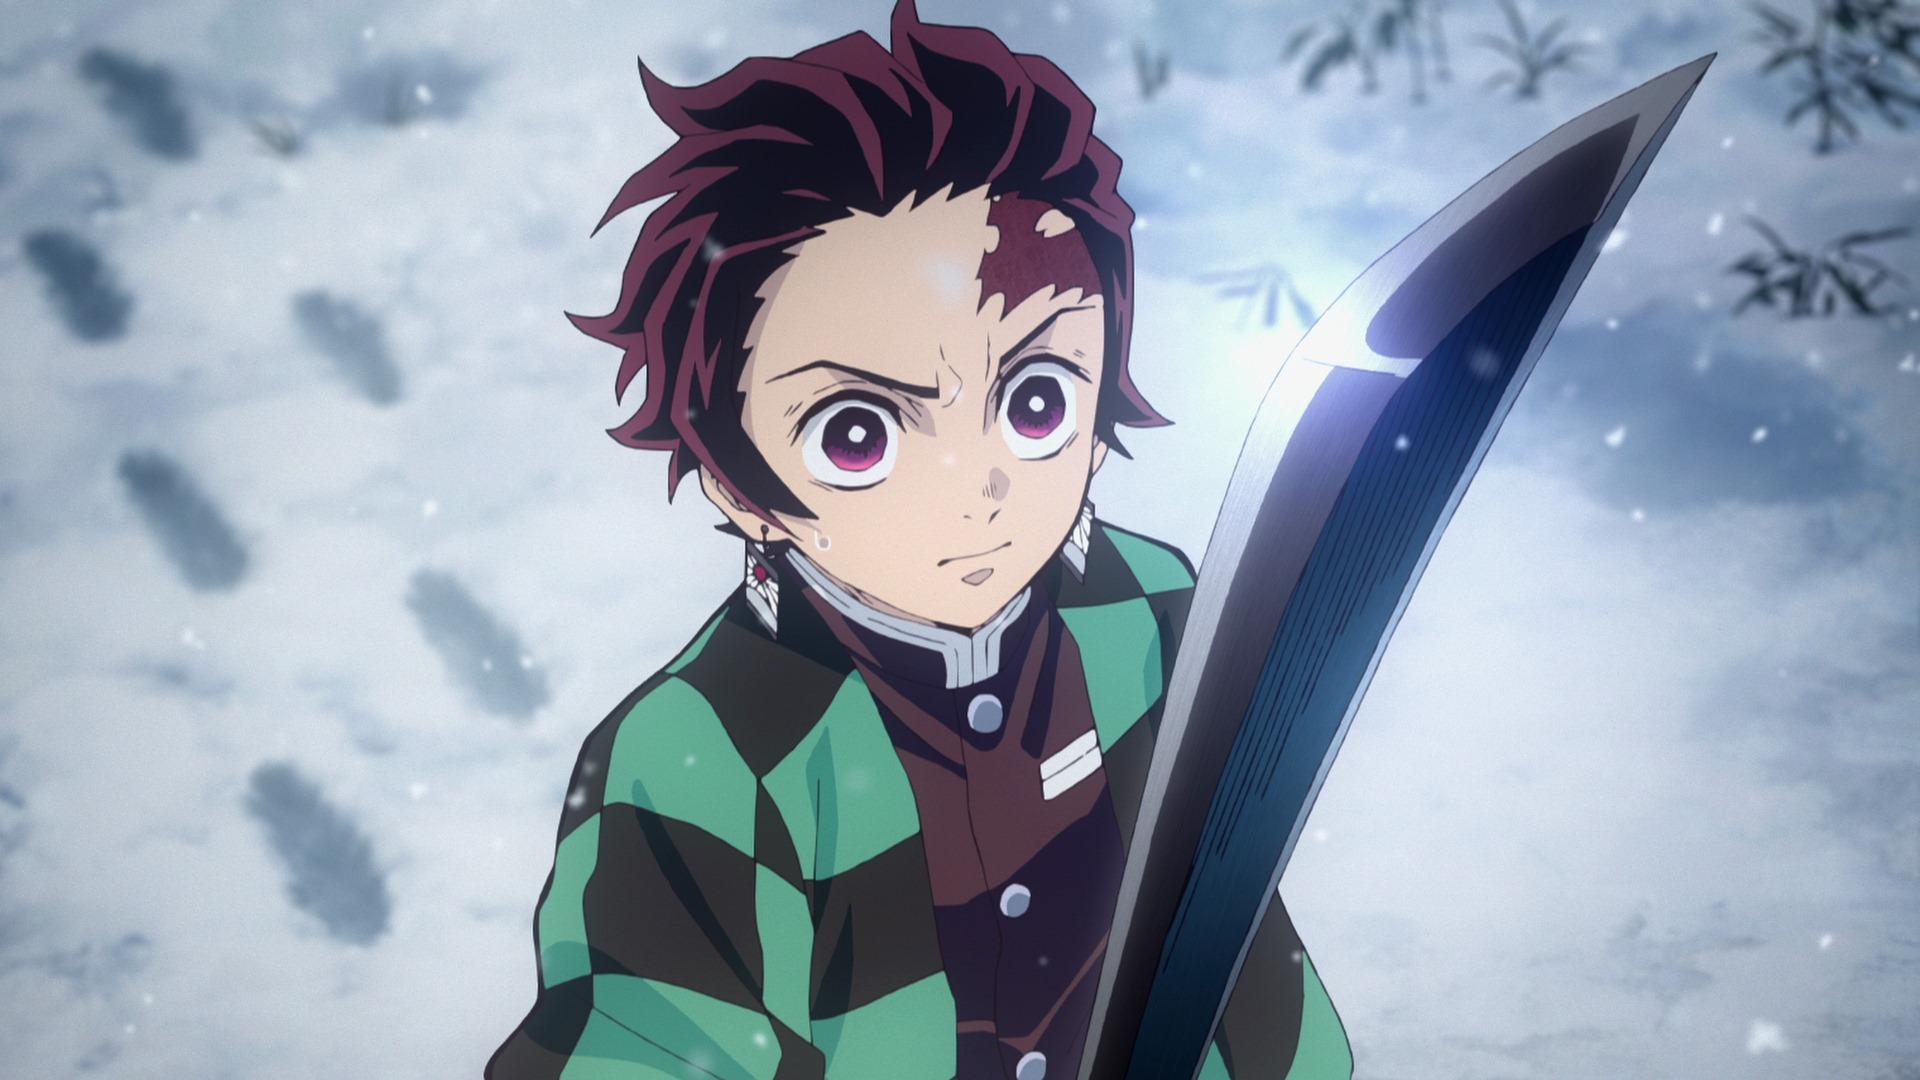 Demon Slayer's Mugen Train movie is pulling into the Netflix